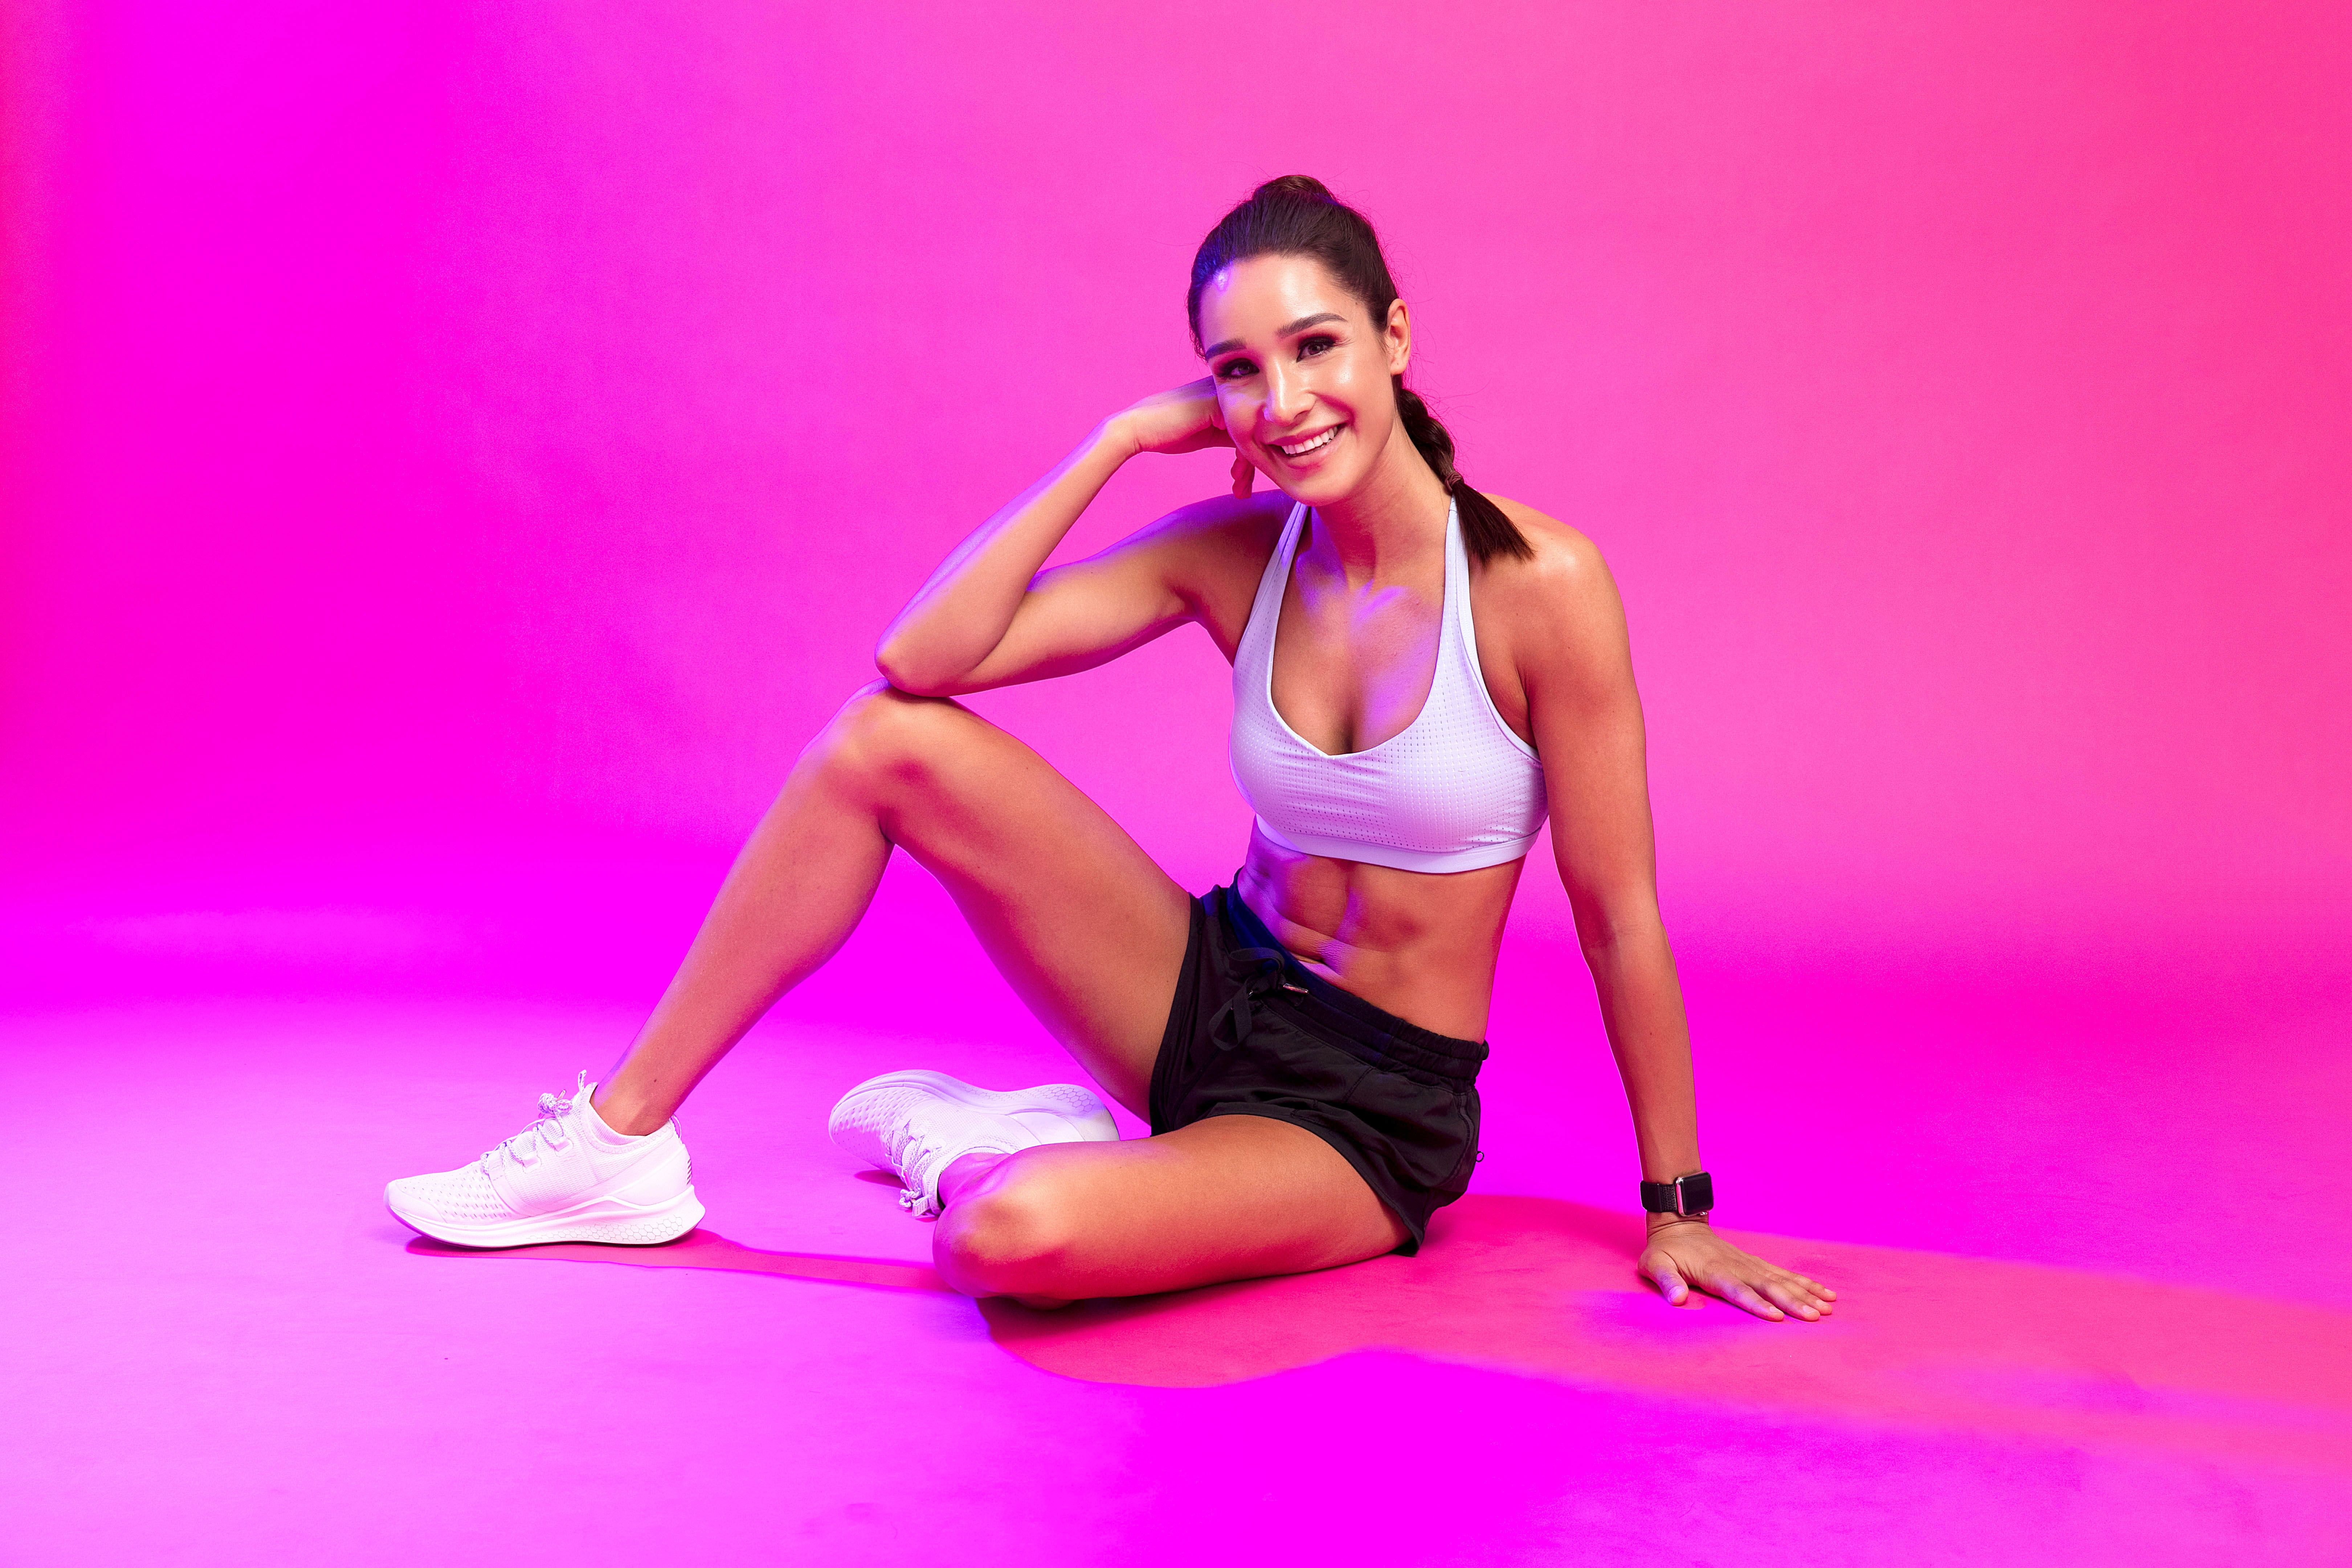 Kayla Itsines - Having a lazy day today! I'm going to do a slow 30